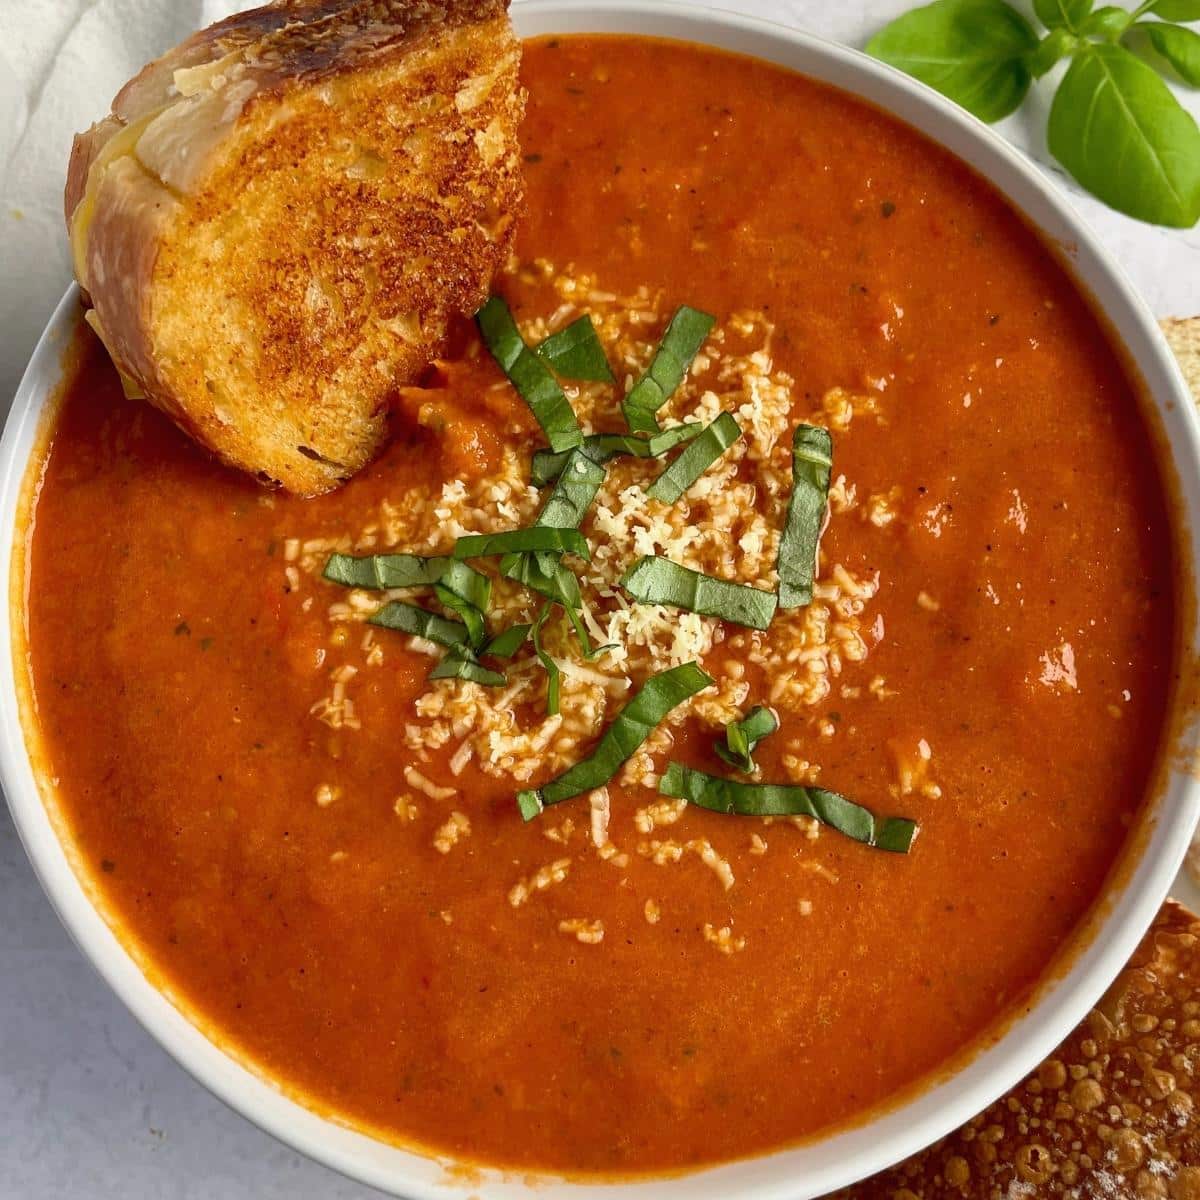 A bowl of vegan roasted tomato soup with a slice of grilled cheese.